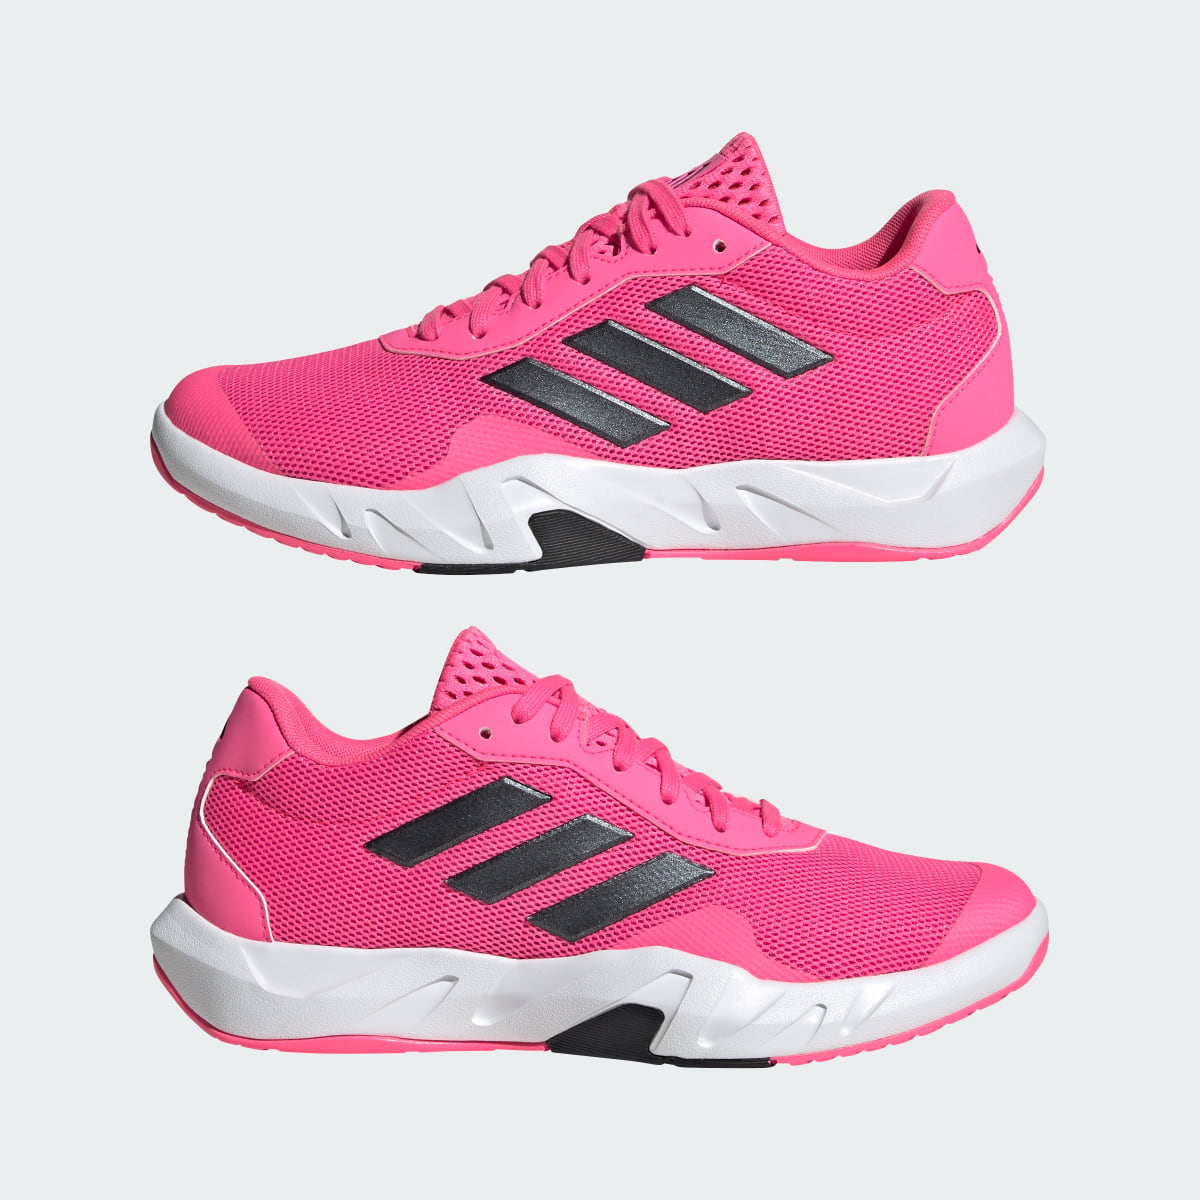 Adidas Amplimove Trainer Shoes. 8